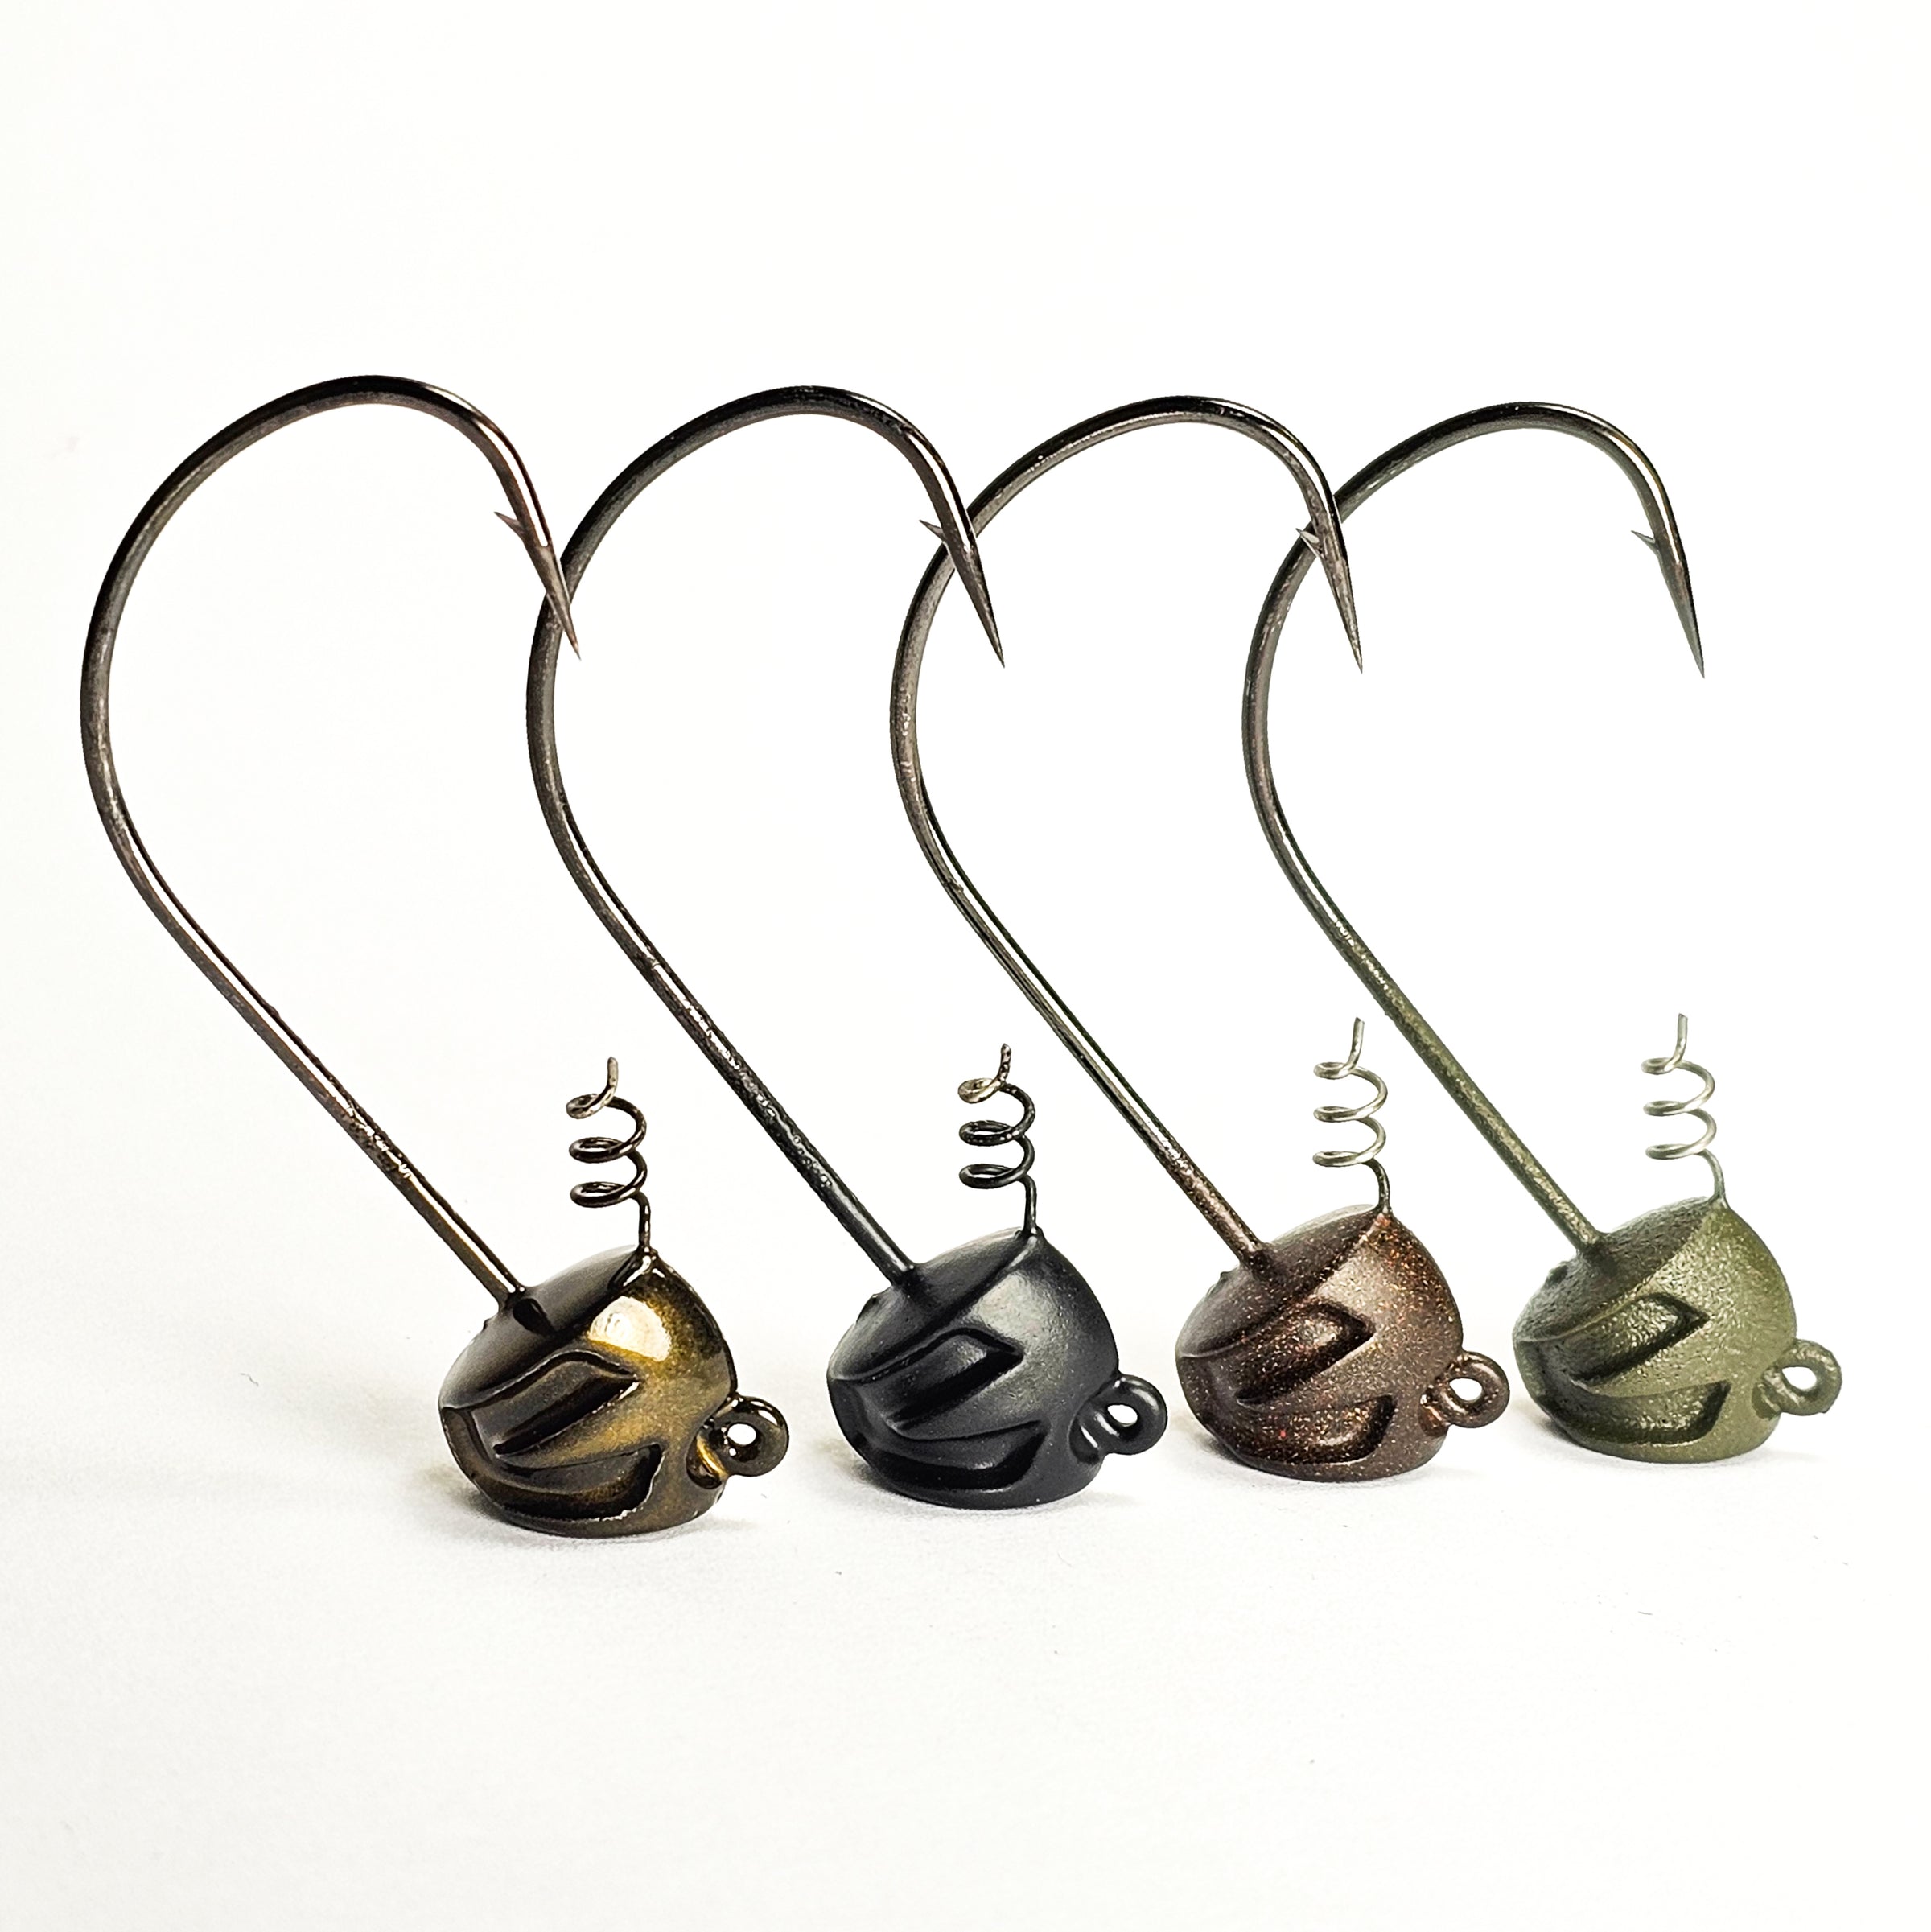 StrongArm Shakey Head - 2 Pack – FIVE Bass Tackle